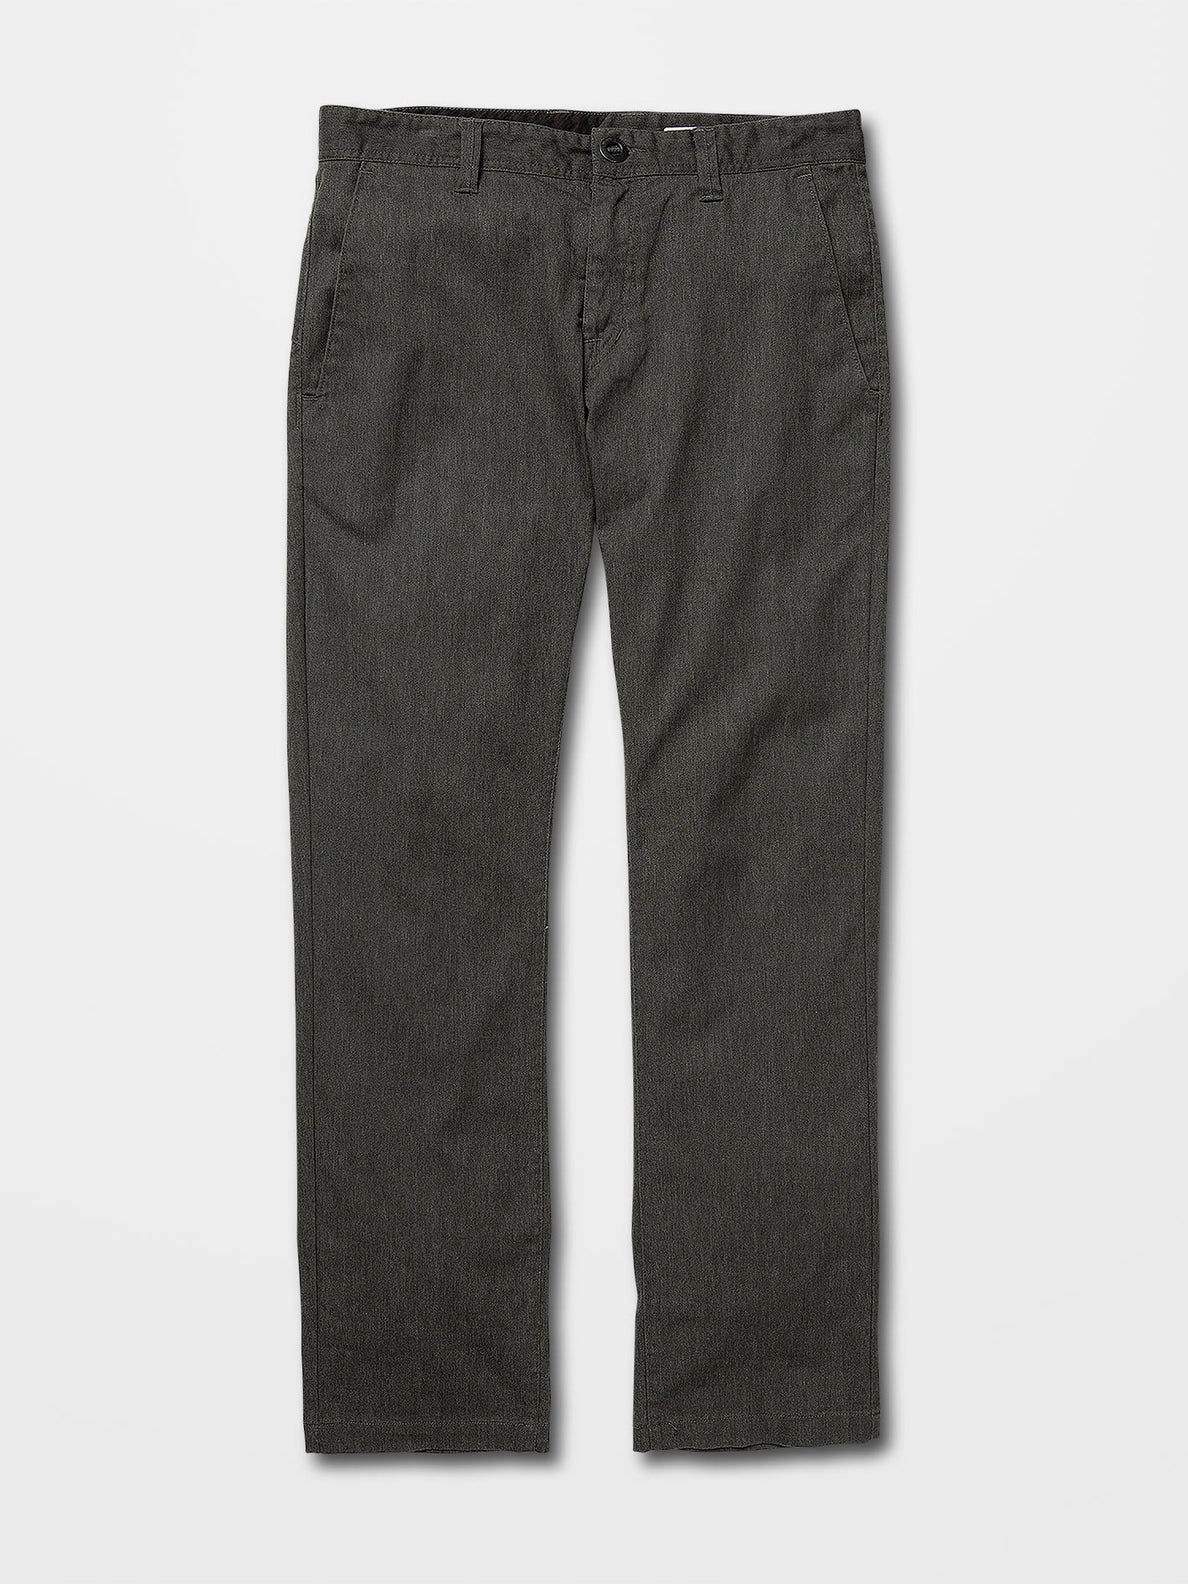 Frickin Modern Stretch Chino Trousers - CHARCOAL HEATHER (A1132208_CHH) [4]